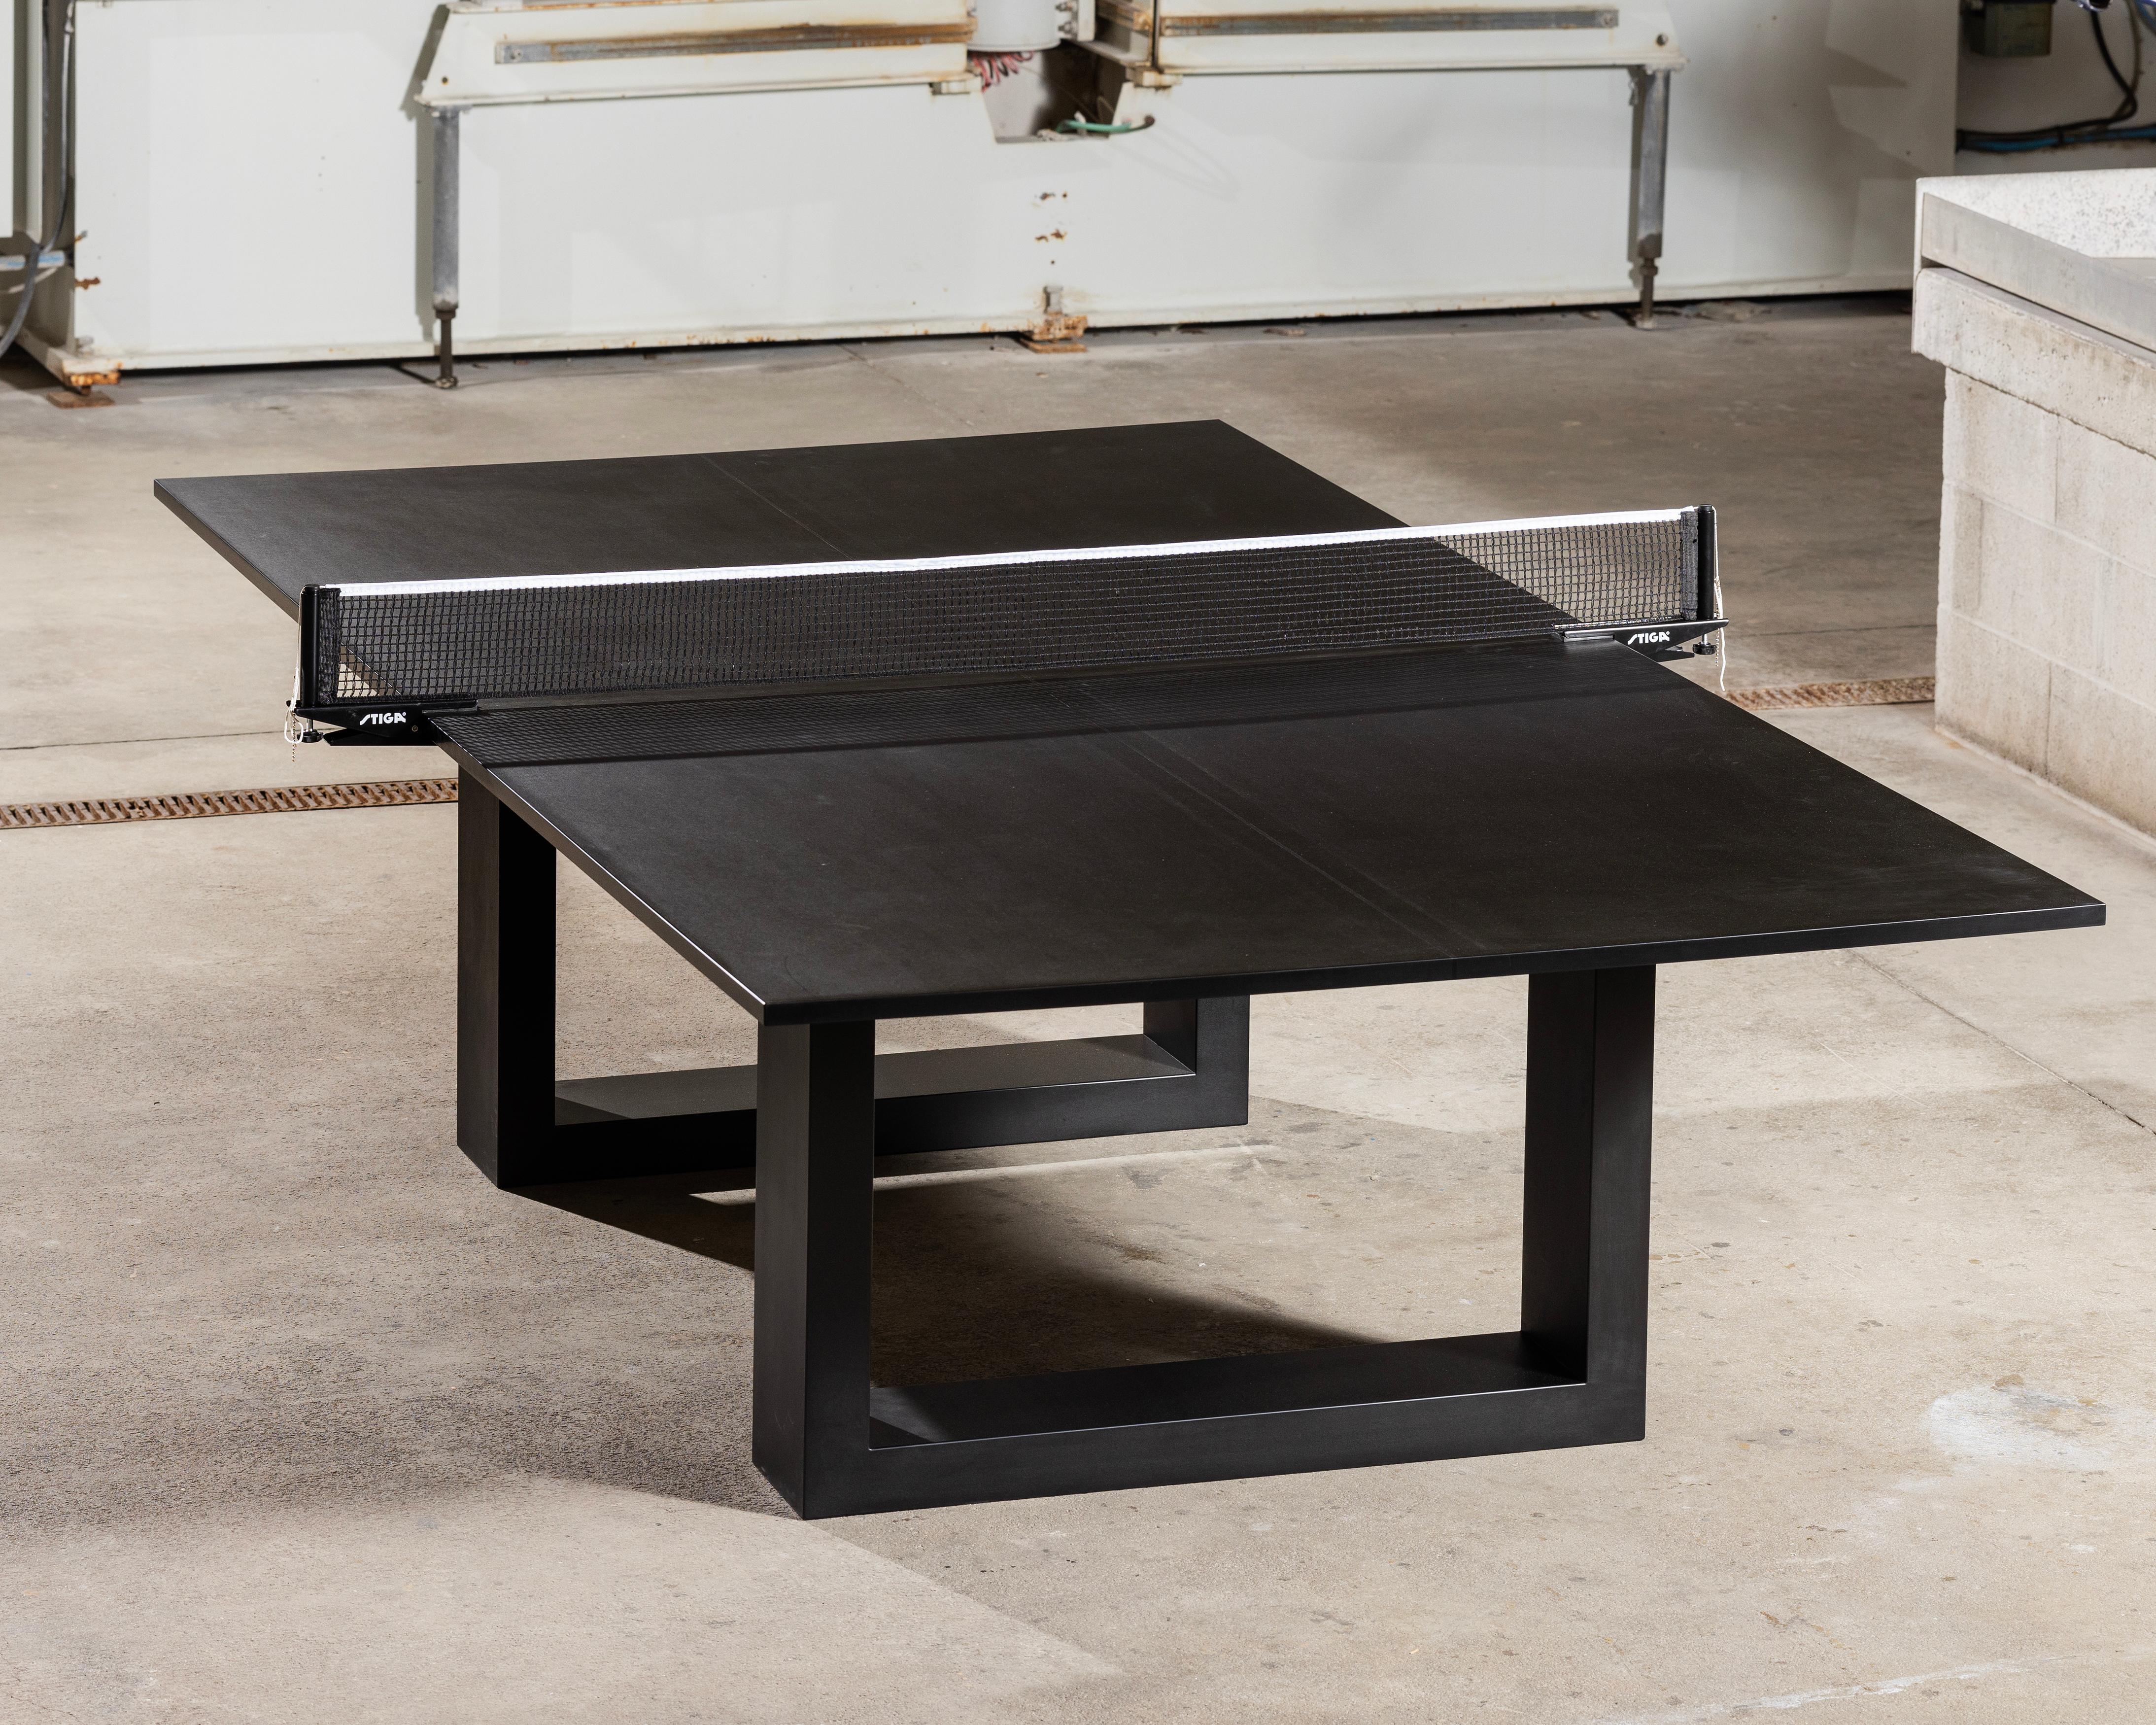 The classic James de Wulf Ping Pong Table, redesigned in a jet black finish.
The table is created entirely of post-consumer recycled paper and cardboard, treated in a petroleum-free, formaldehyde-free resin. The play surface is a flat matte black.